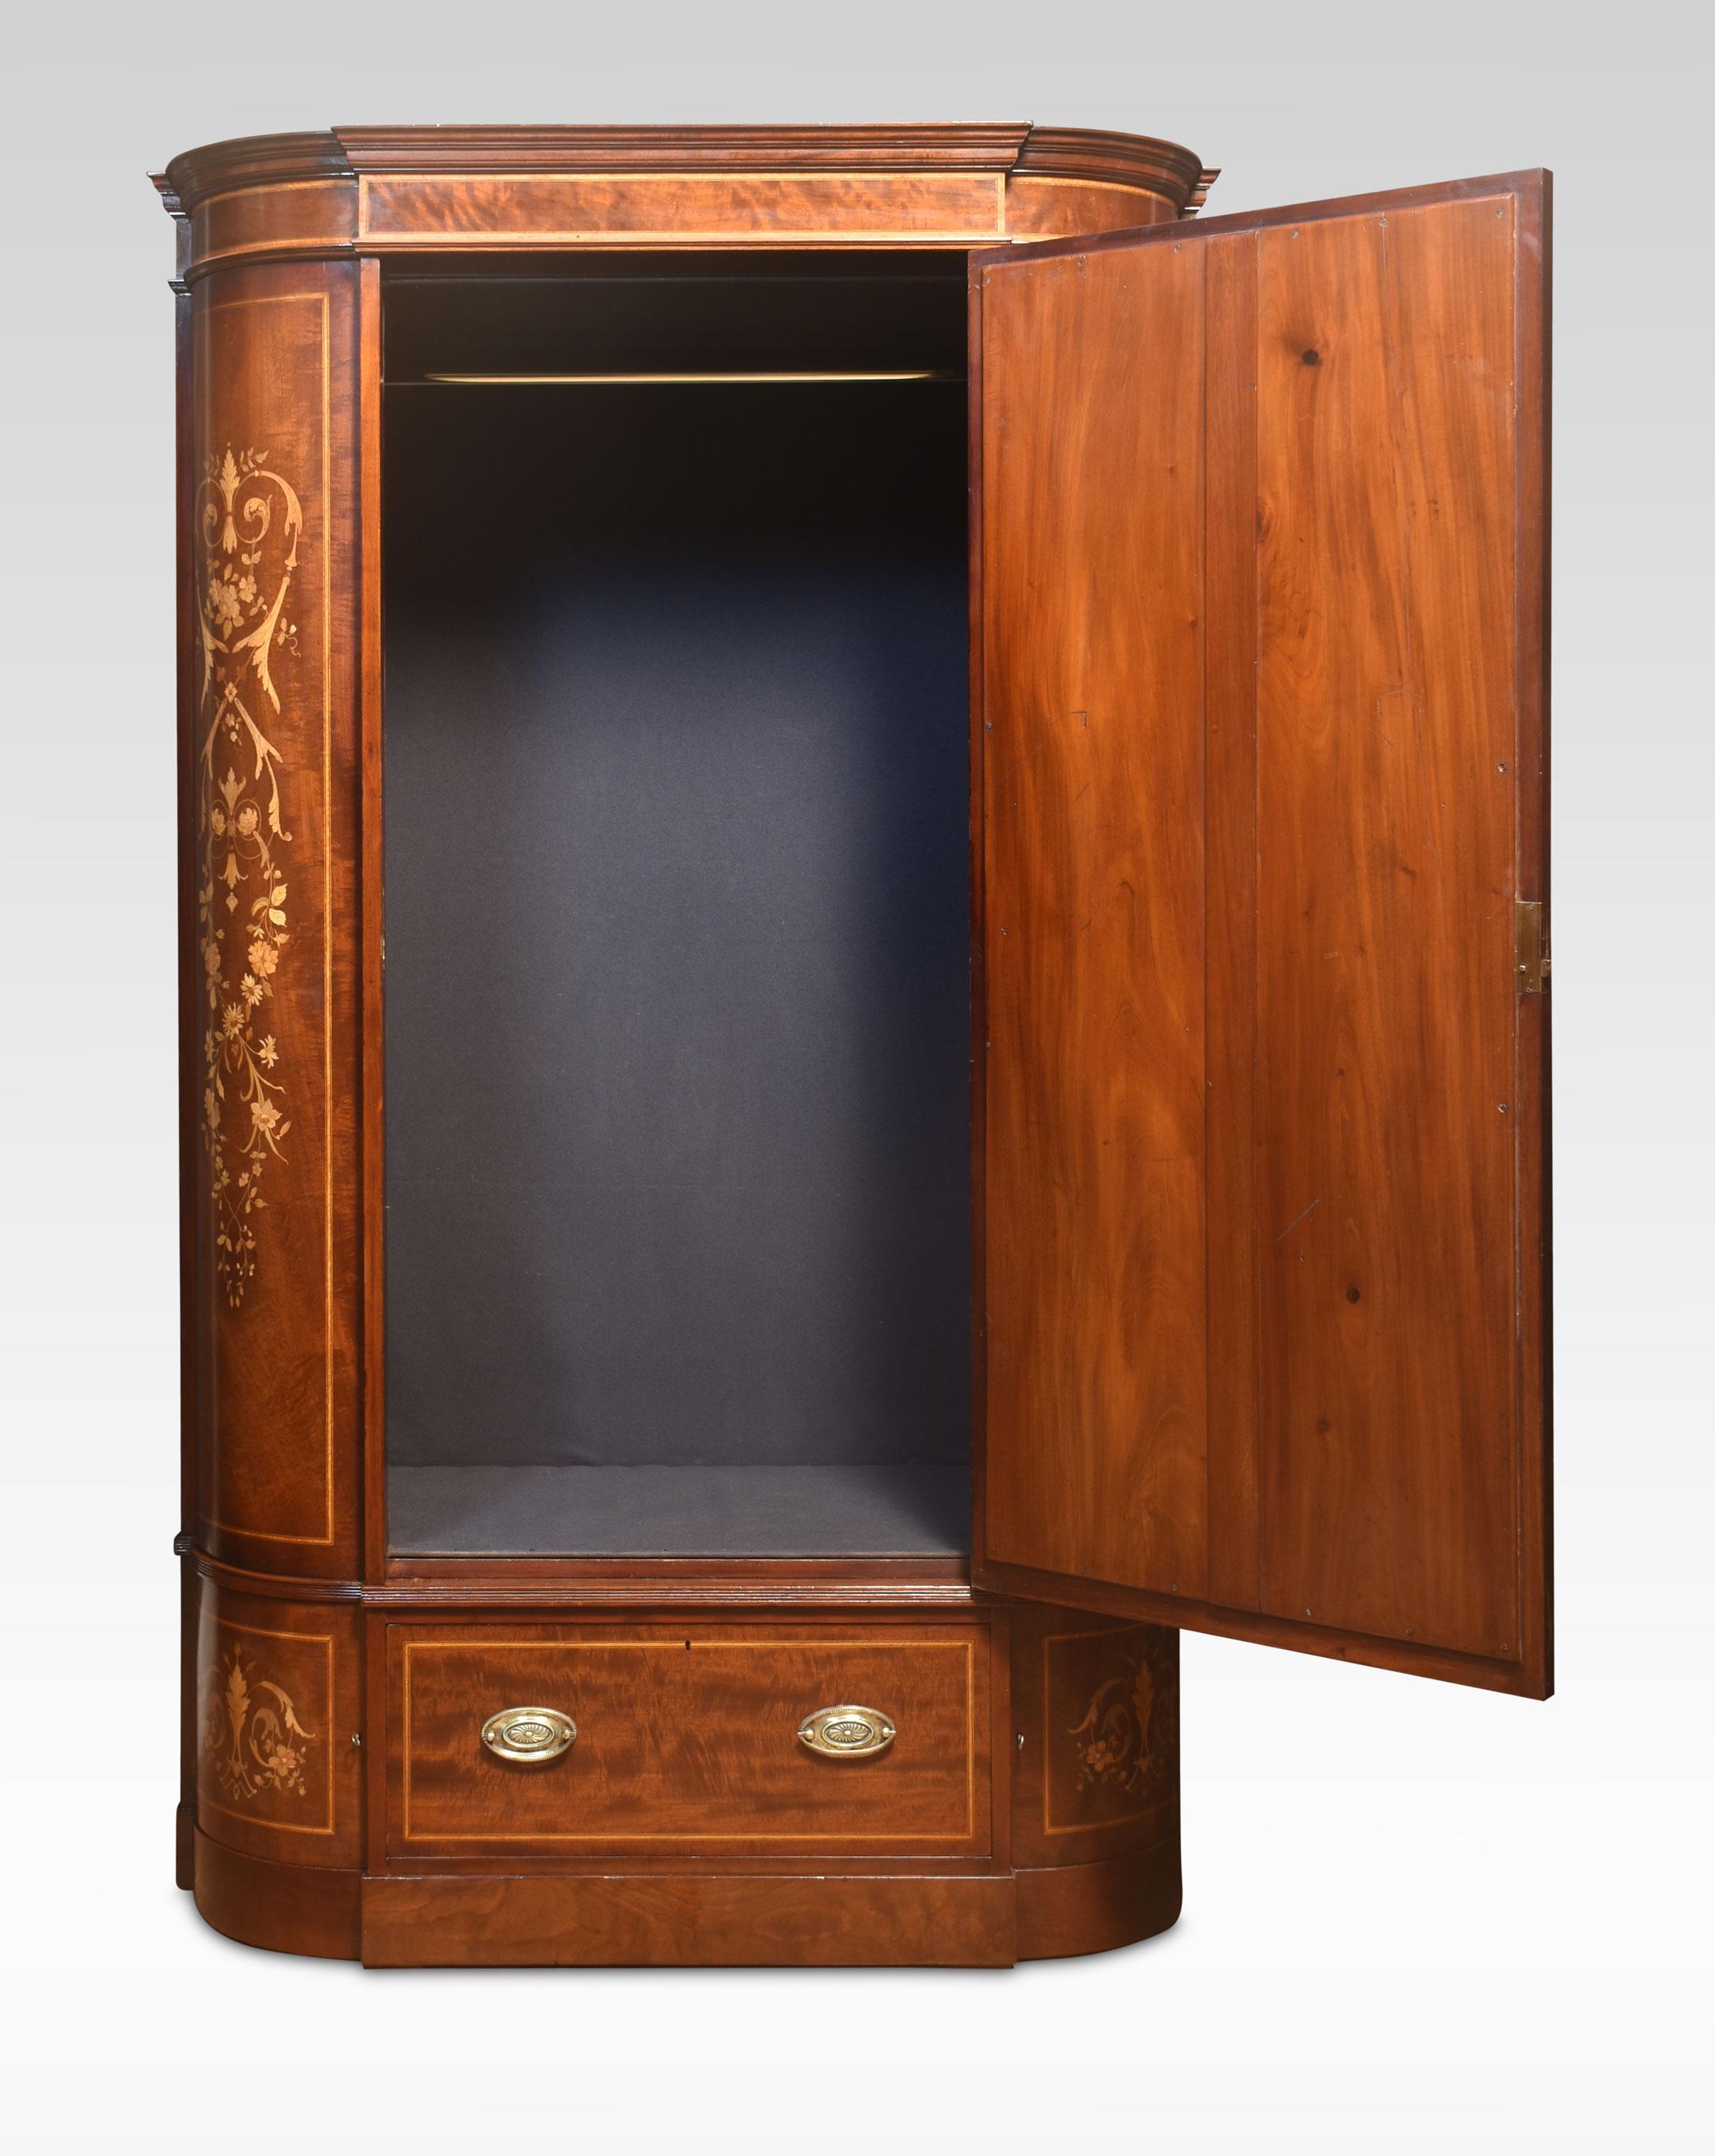 Early 20th-century mahogany and marquetry wardrobe, having moulded cornice above the central bevelled mirror door opening to reveal large upholstered hanging area. Flanked by marquetry decorated quarter bowed panels. The base section is fitted with